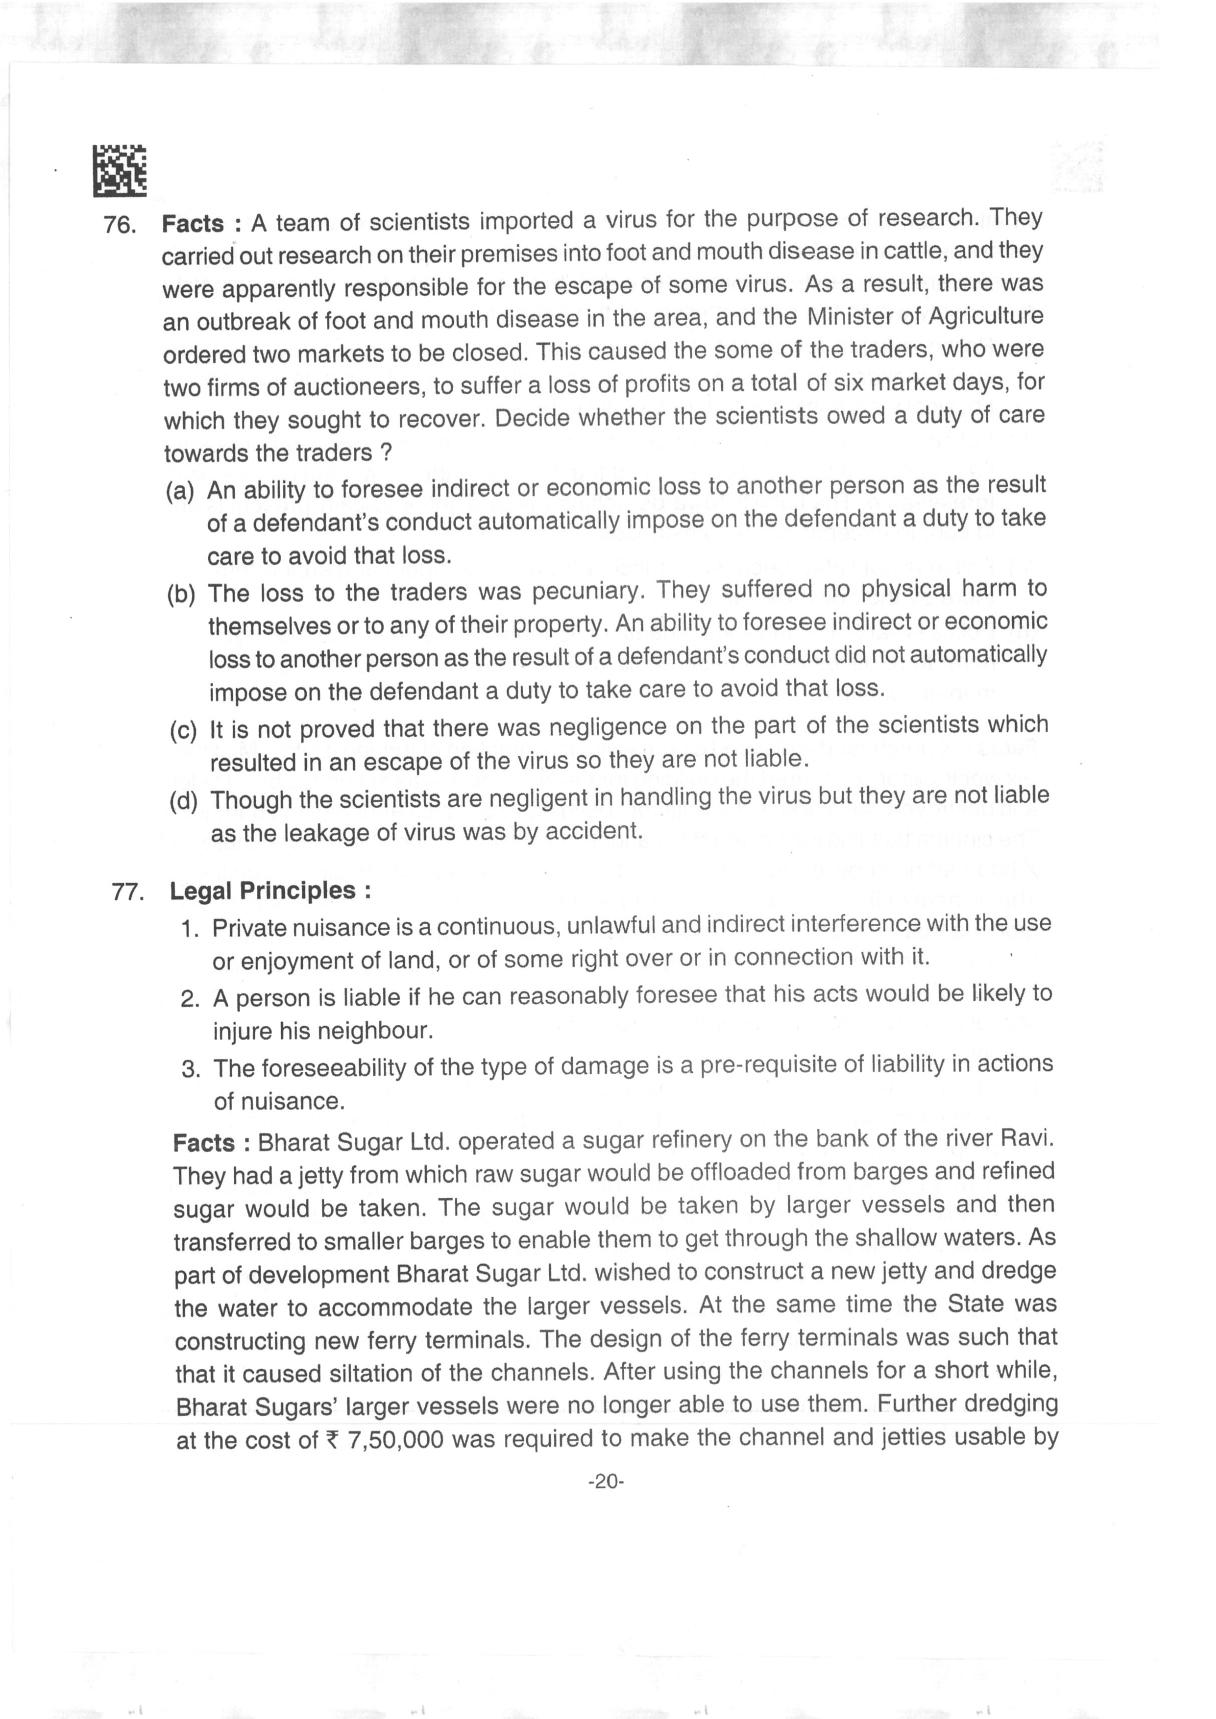 AILET 2019 Question Paper for BA LLB - Page 20